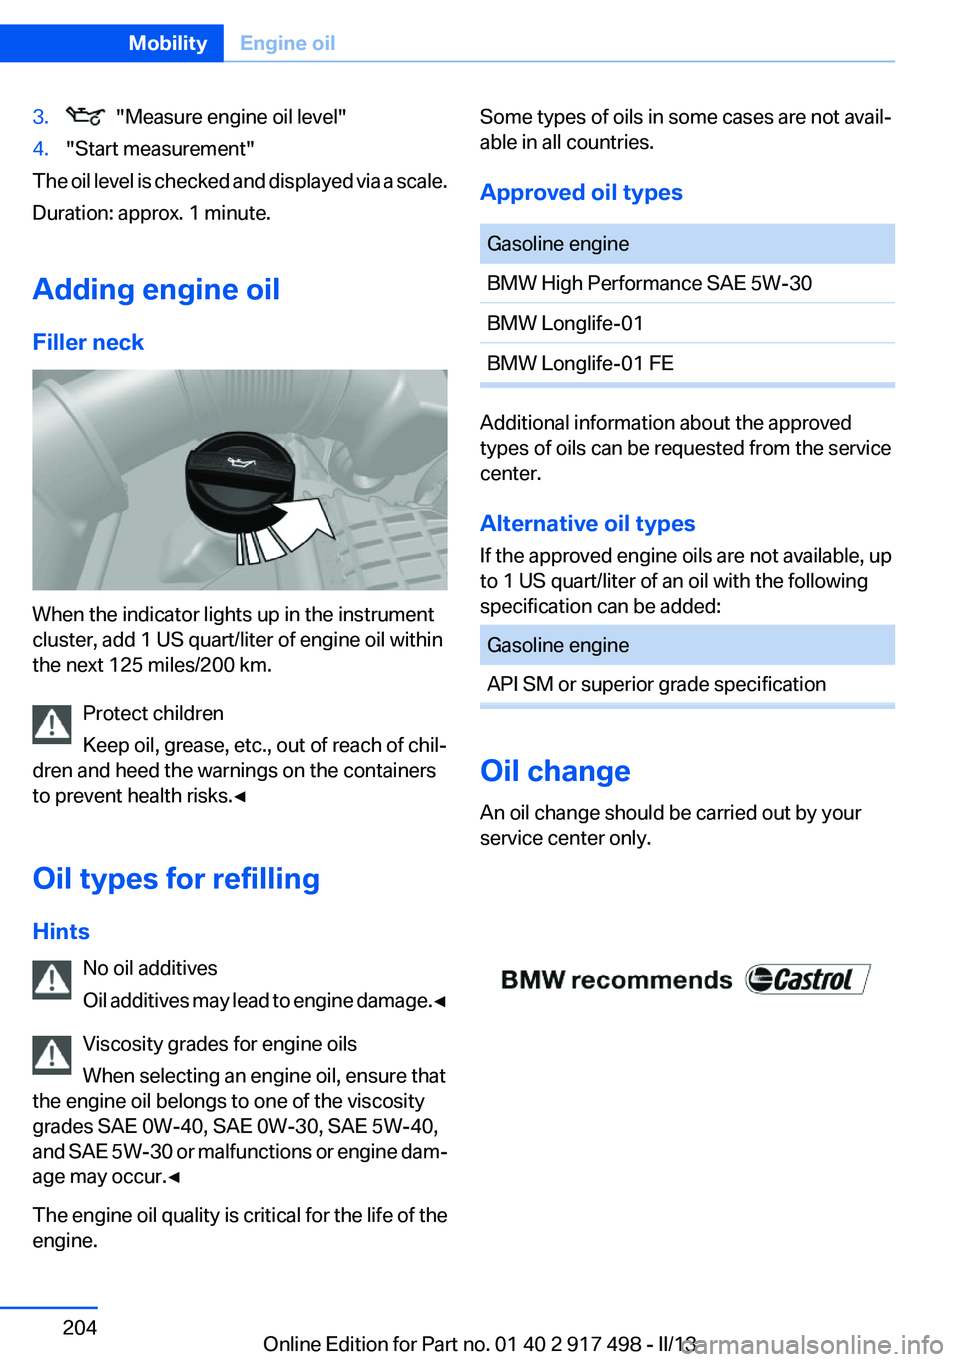 BMW 535I XDRIVE GRAN TURISMO 2013  Owners Manual 3.  "Measure engine oil level"4."Start measurement"
The oil level is checked and displayed via a scale.
Duration: approx. 1 minute.
Adding engine oil
Filler neck
When the indicator lig